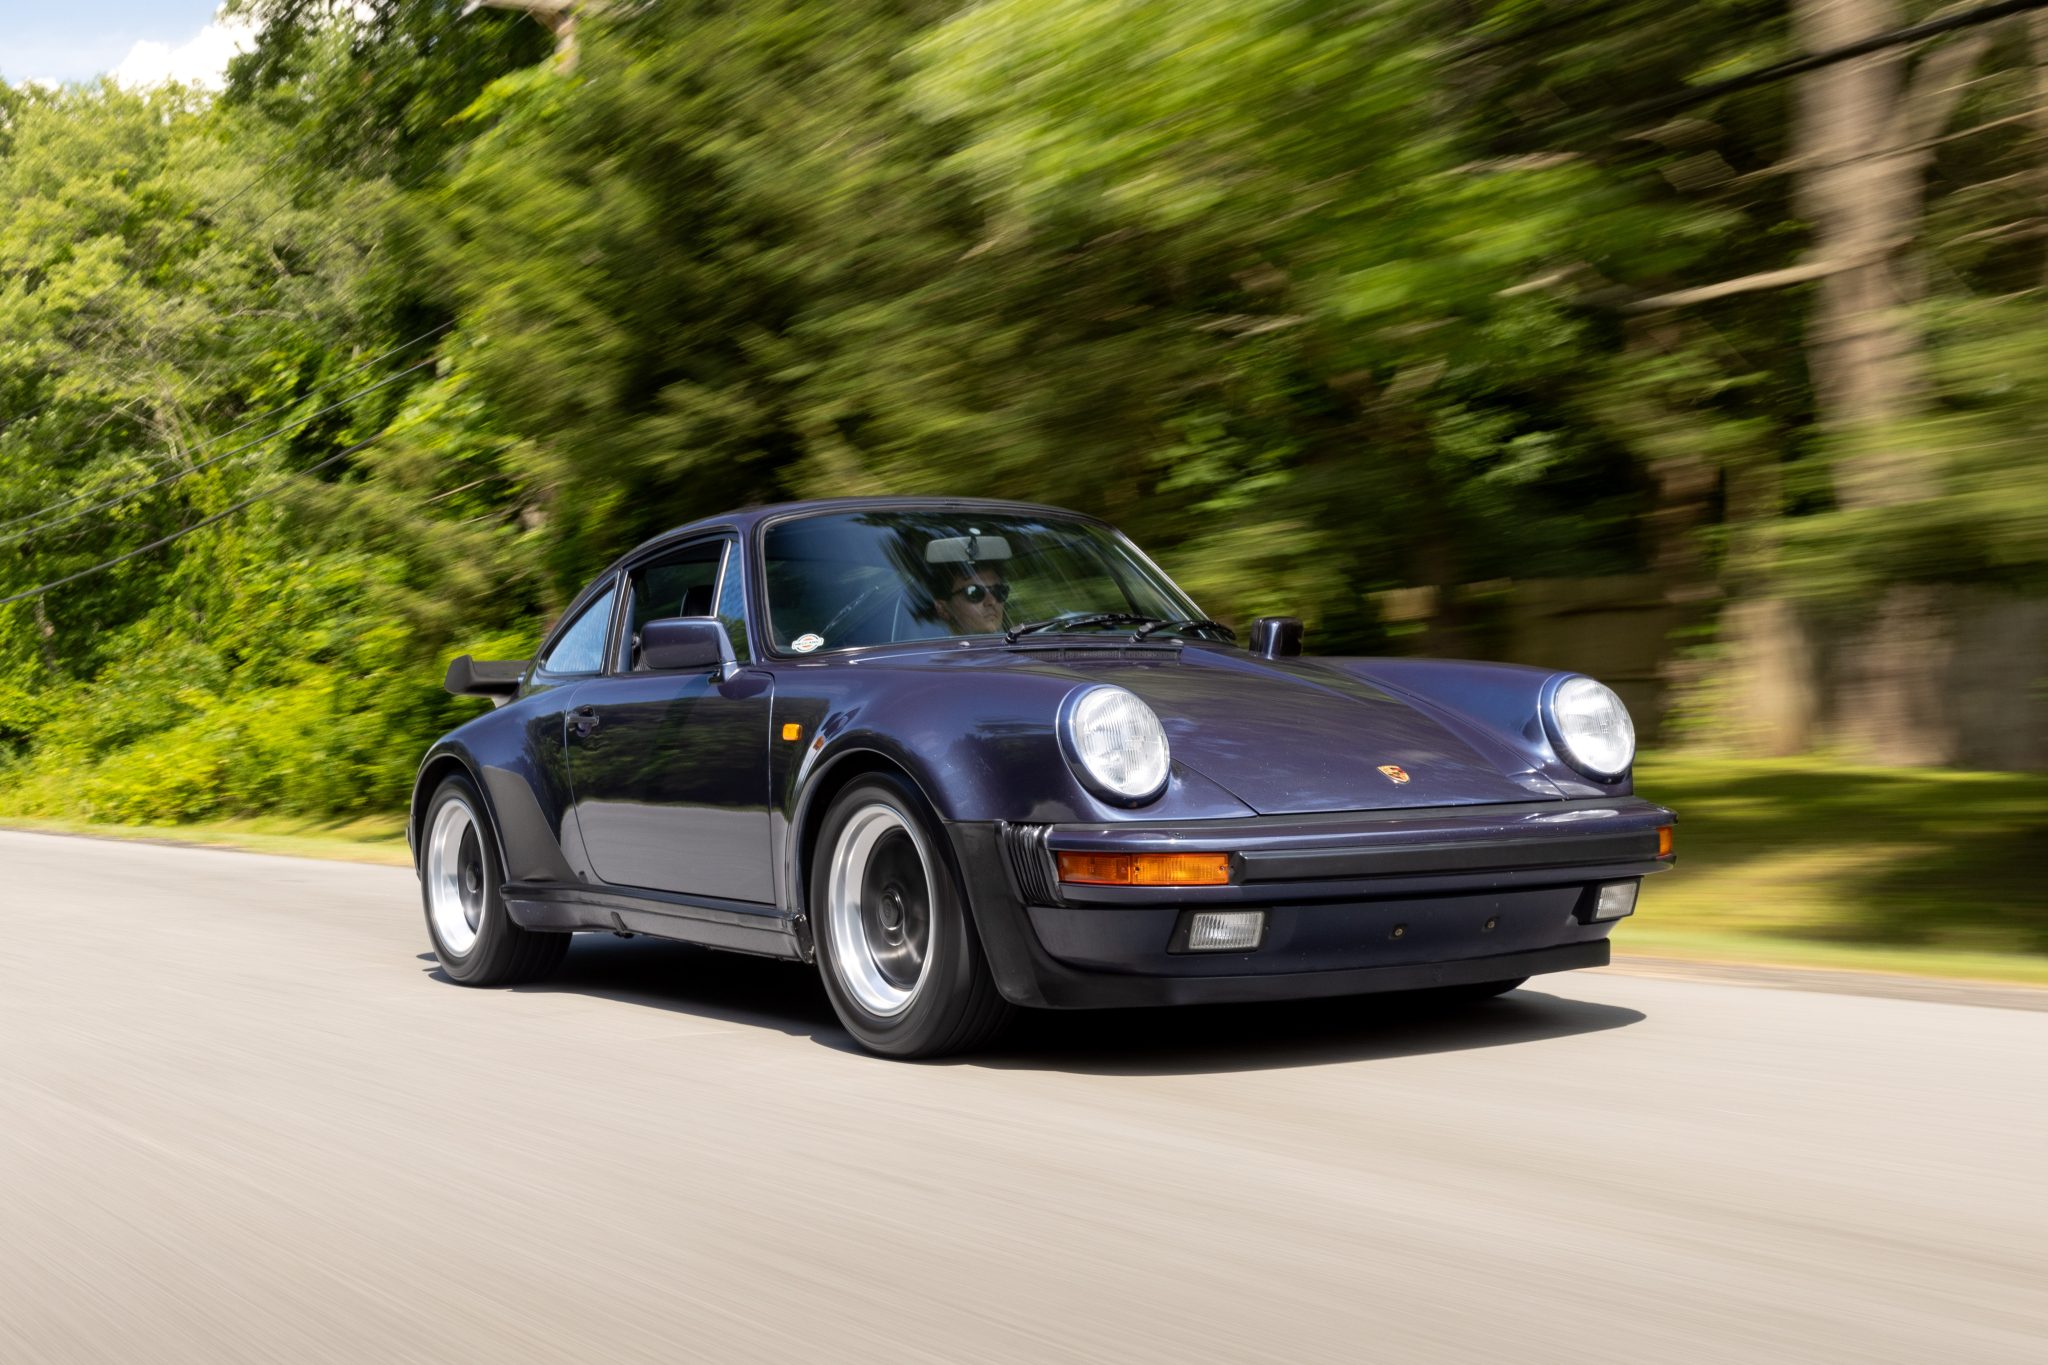 Used Swiss-Market 1986 Porsche 911 Turbo Coupe Review